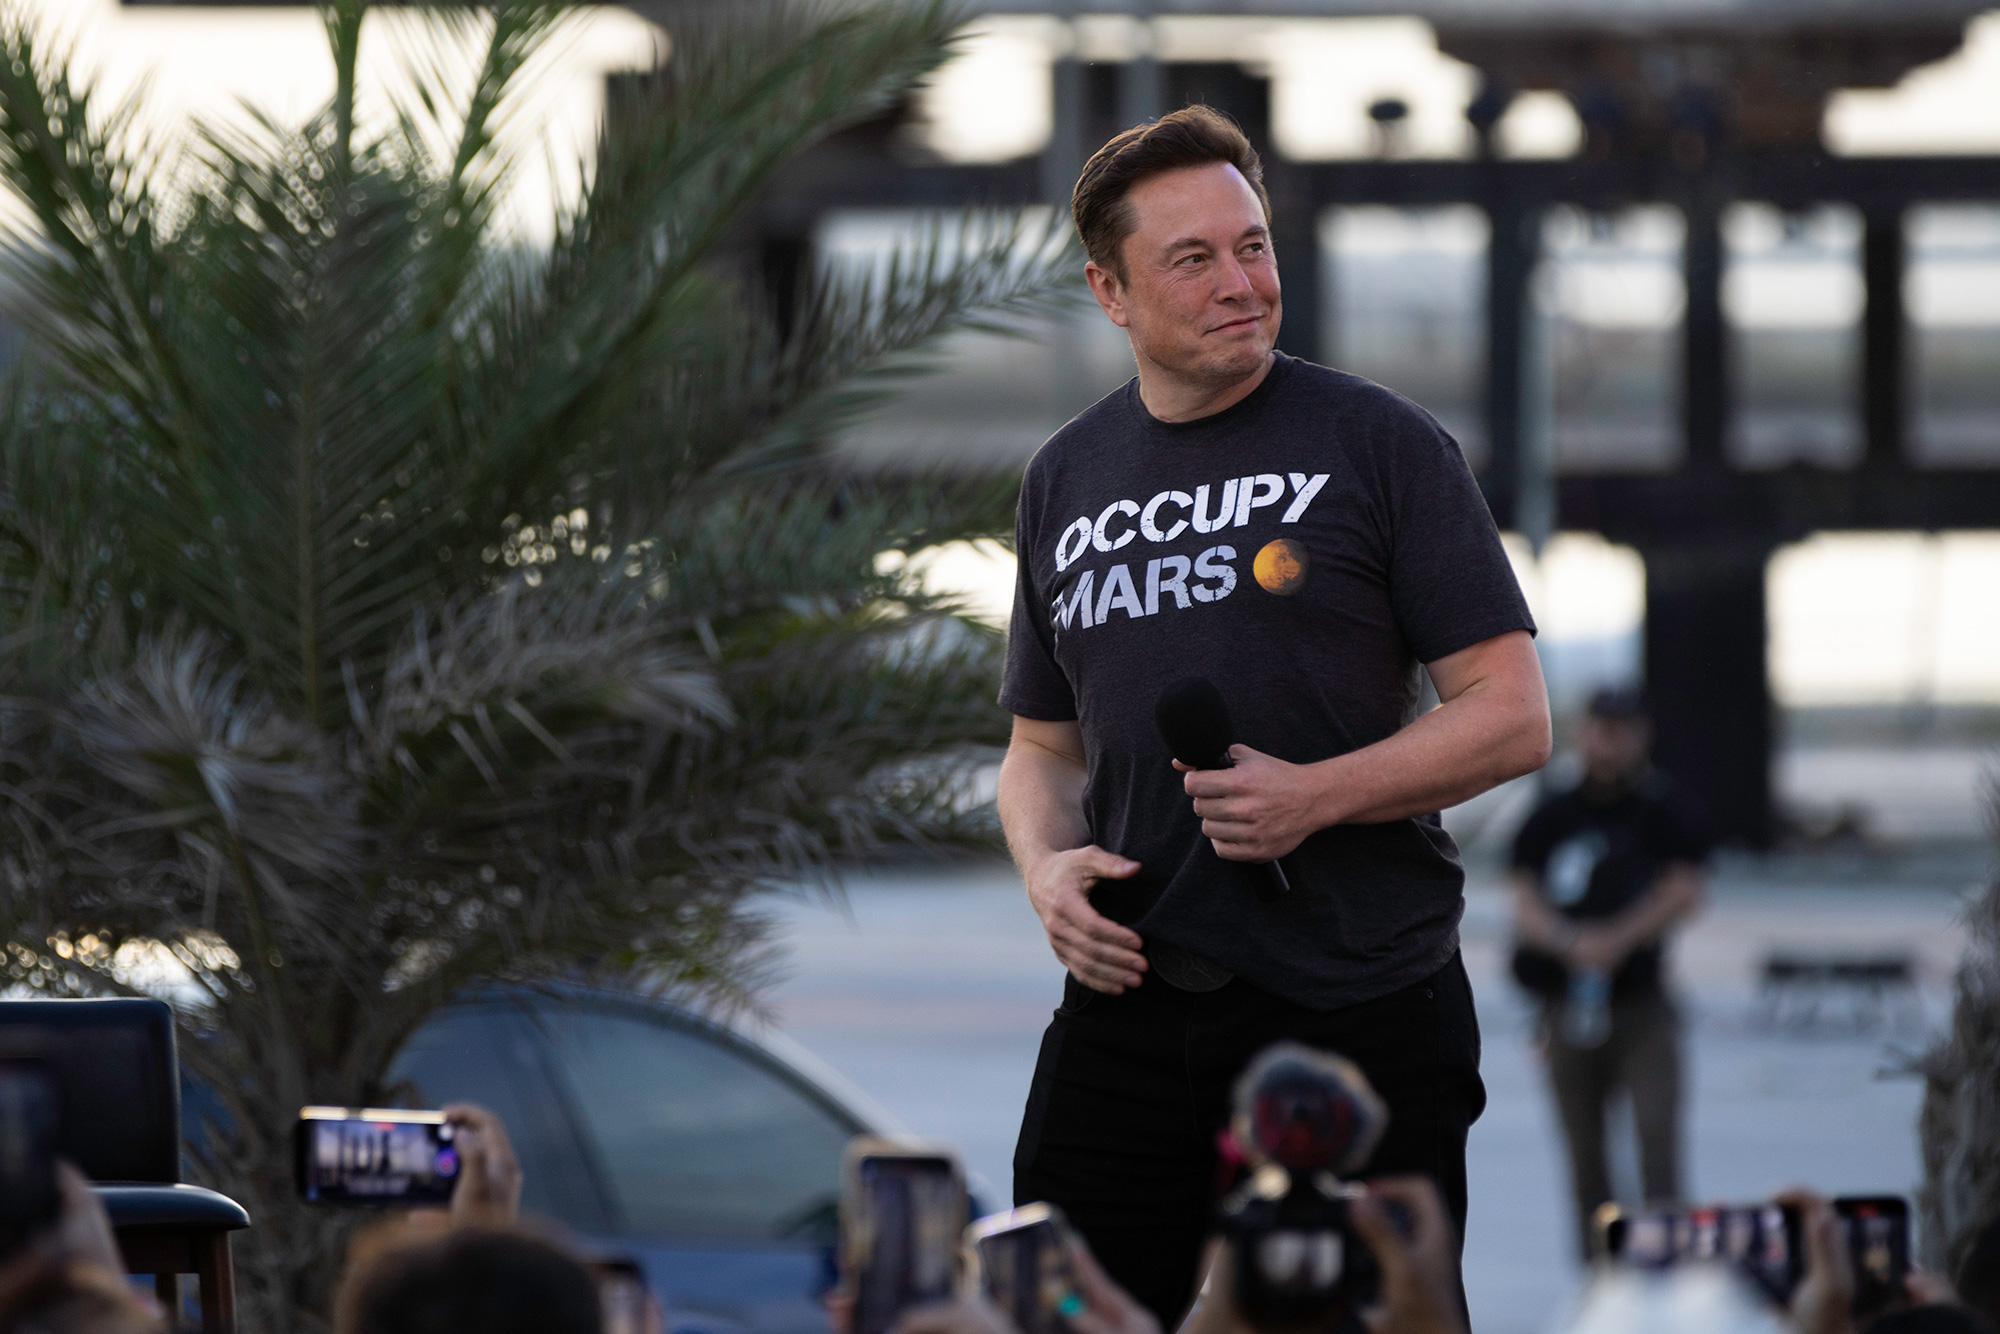 Elon Musk walks on stage during a T-Mobile and SpaceX joint event  in Boca Chica Beach, Texas, on August 25, 2022.